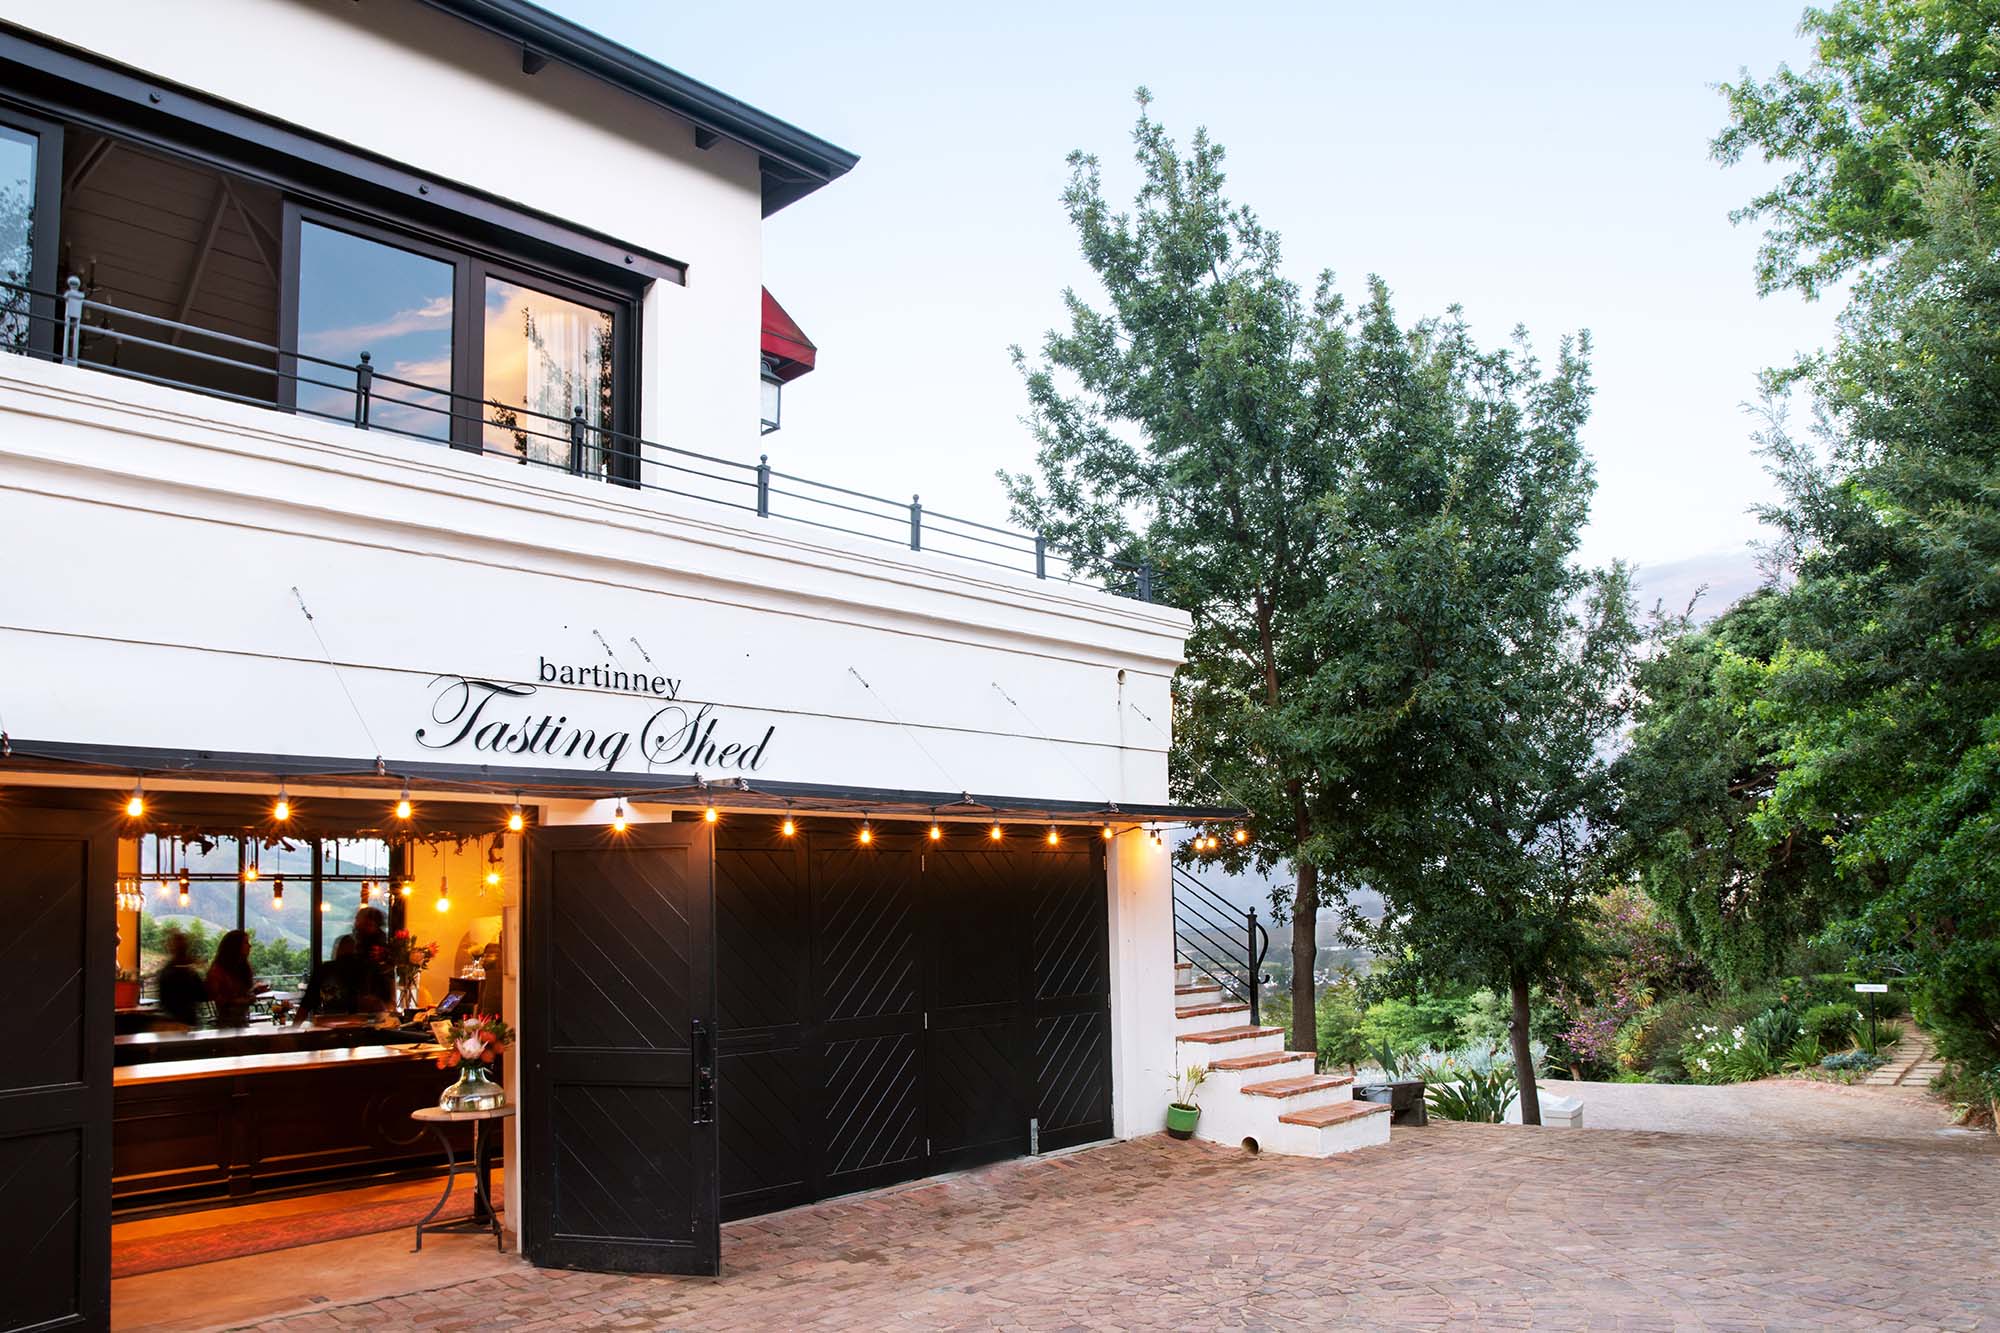 Join us for a wine tasting at the Bartinney Tasting Shed 